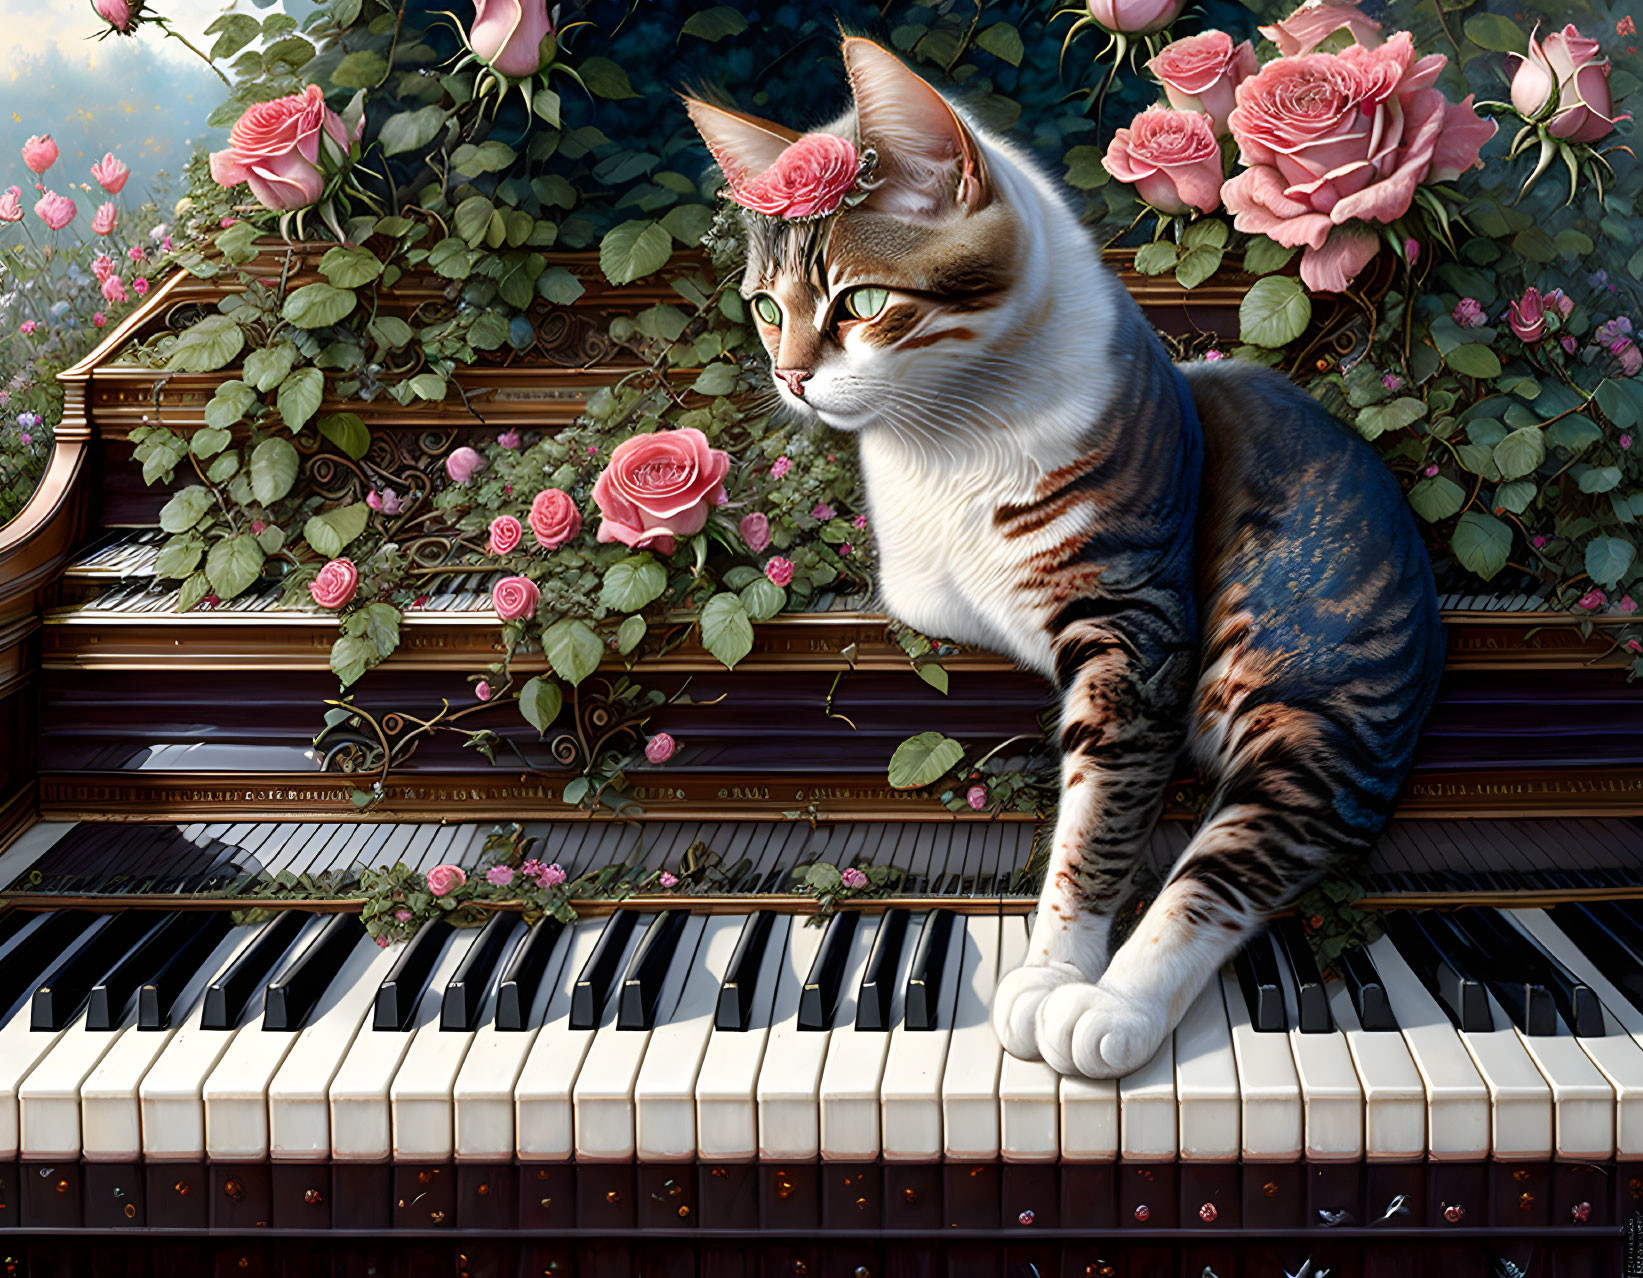 Cat driving roses piano. extreme details, full fro